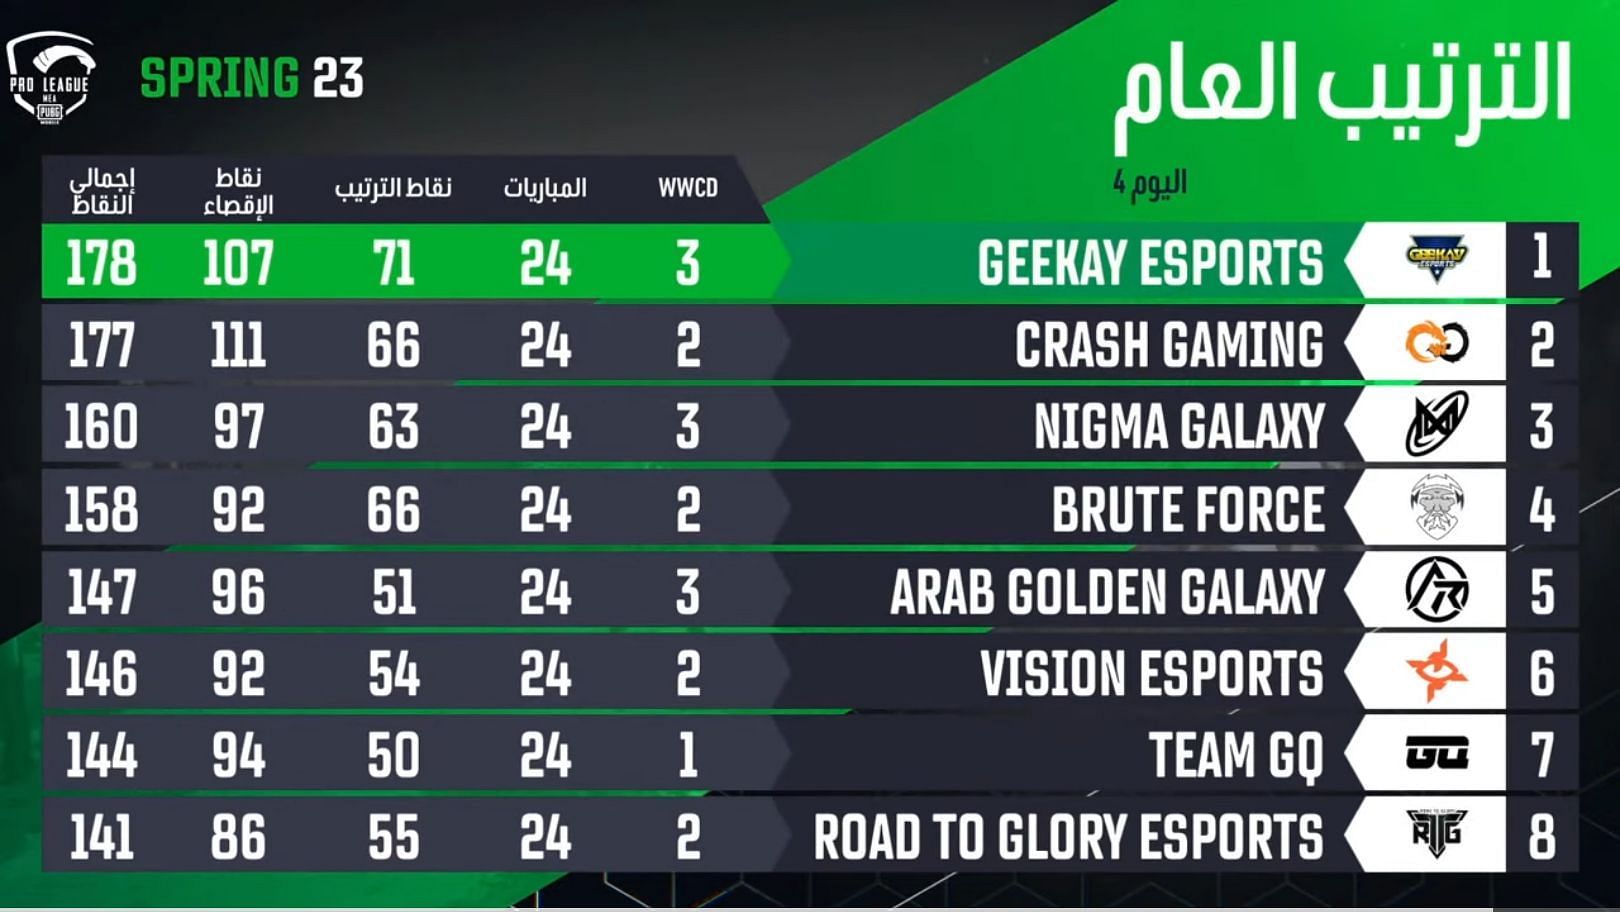 Nigma Galaxy came third in MEA Championship Spring. (Image via PUBG Mobile)